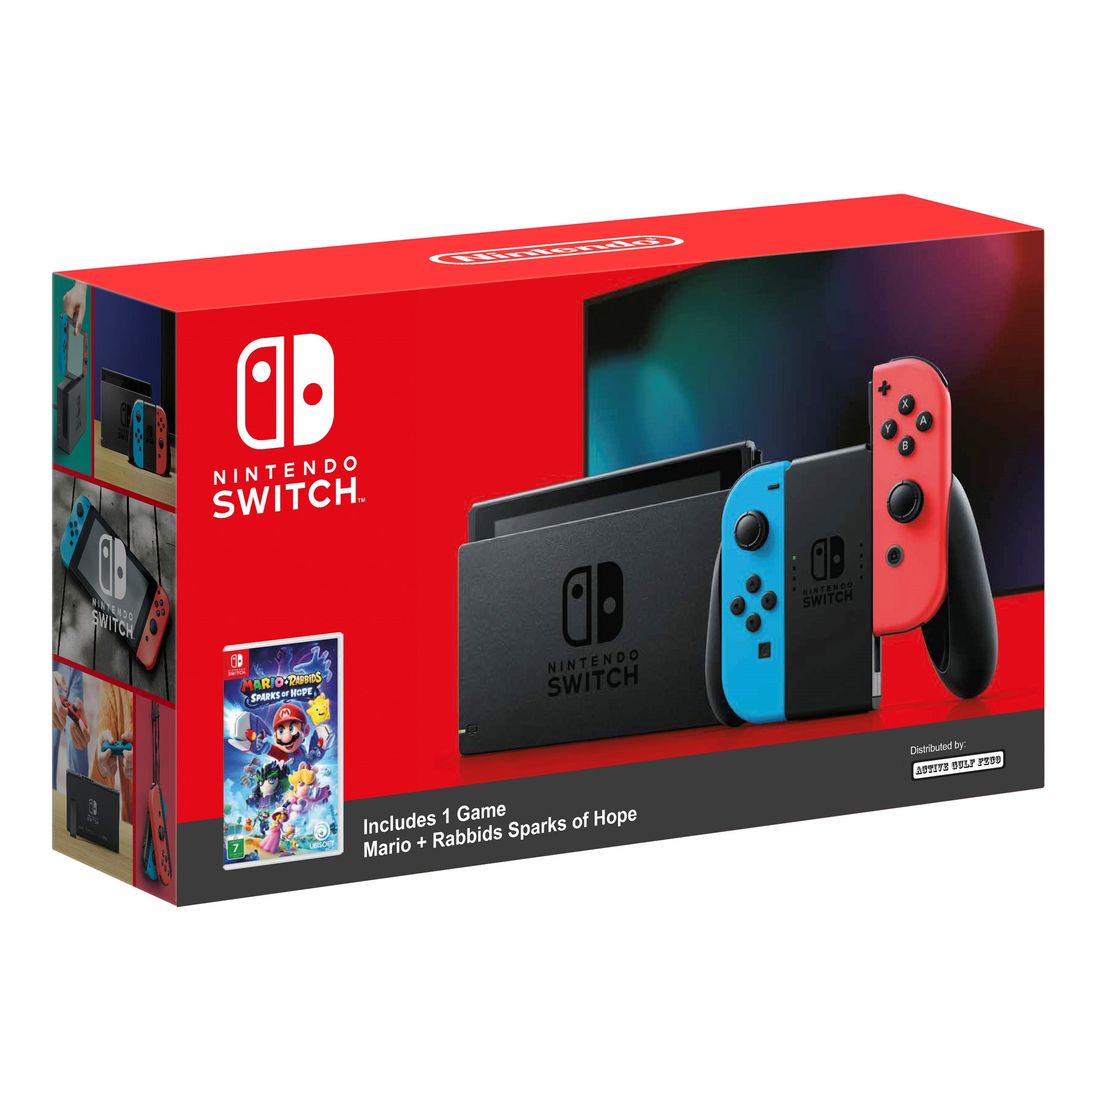 Nintendo Switch Extended Battery Neon Joy-Con Console + Mario + Rabbids Sparks of Hope